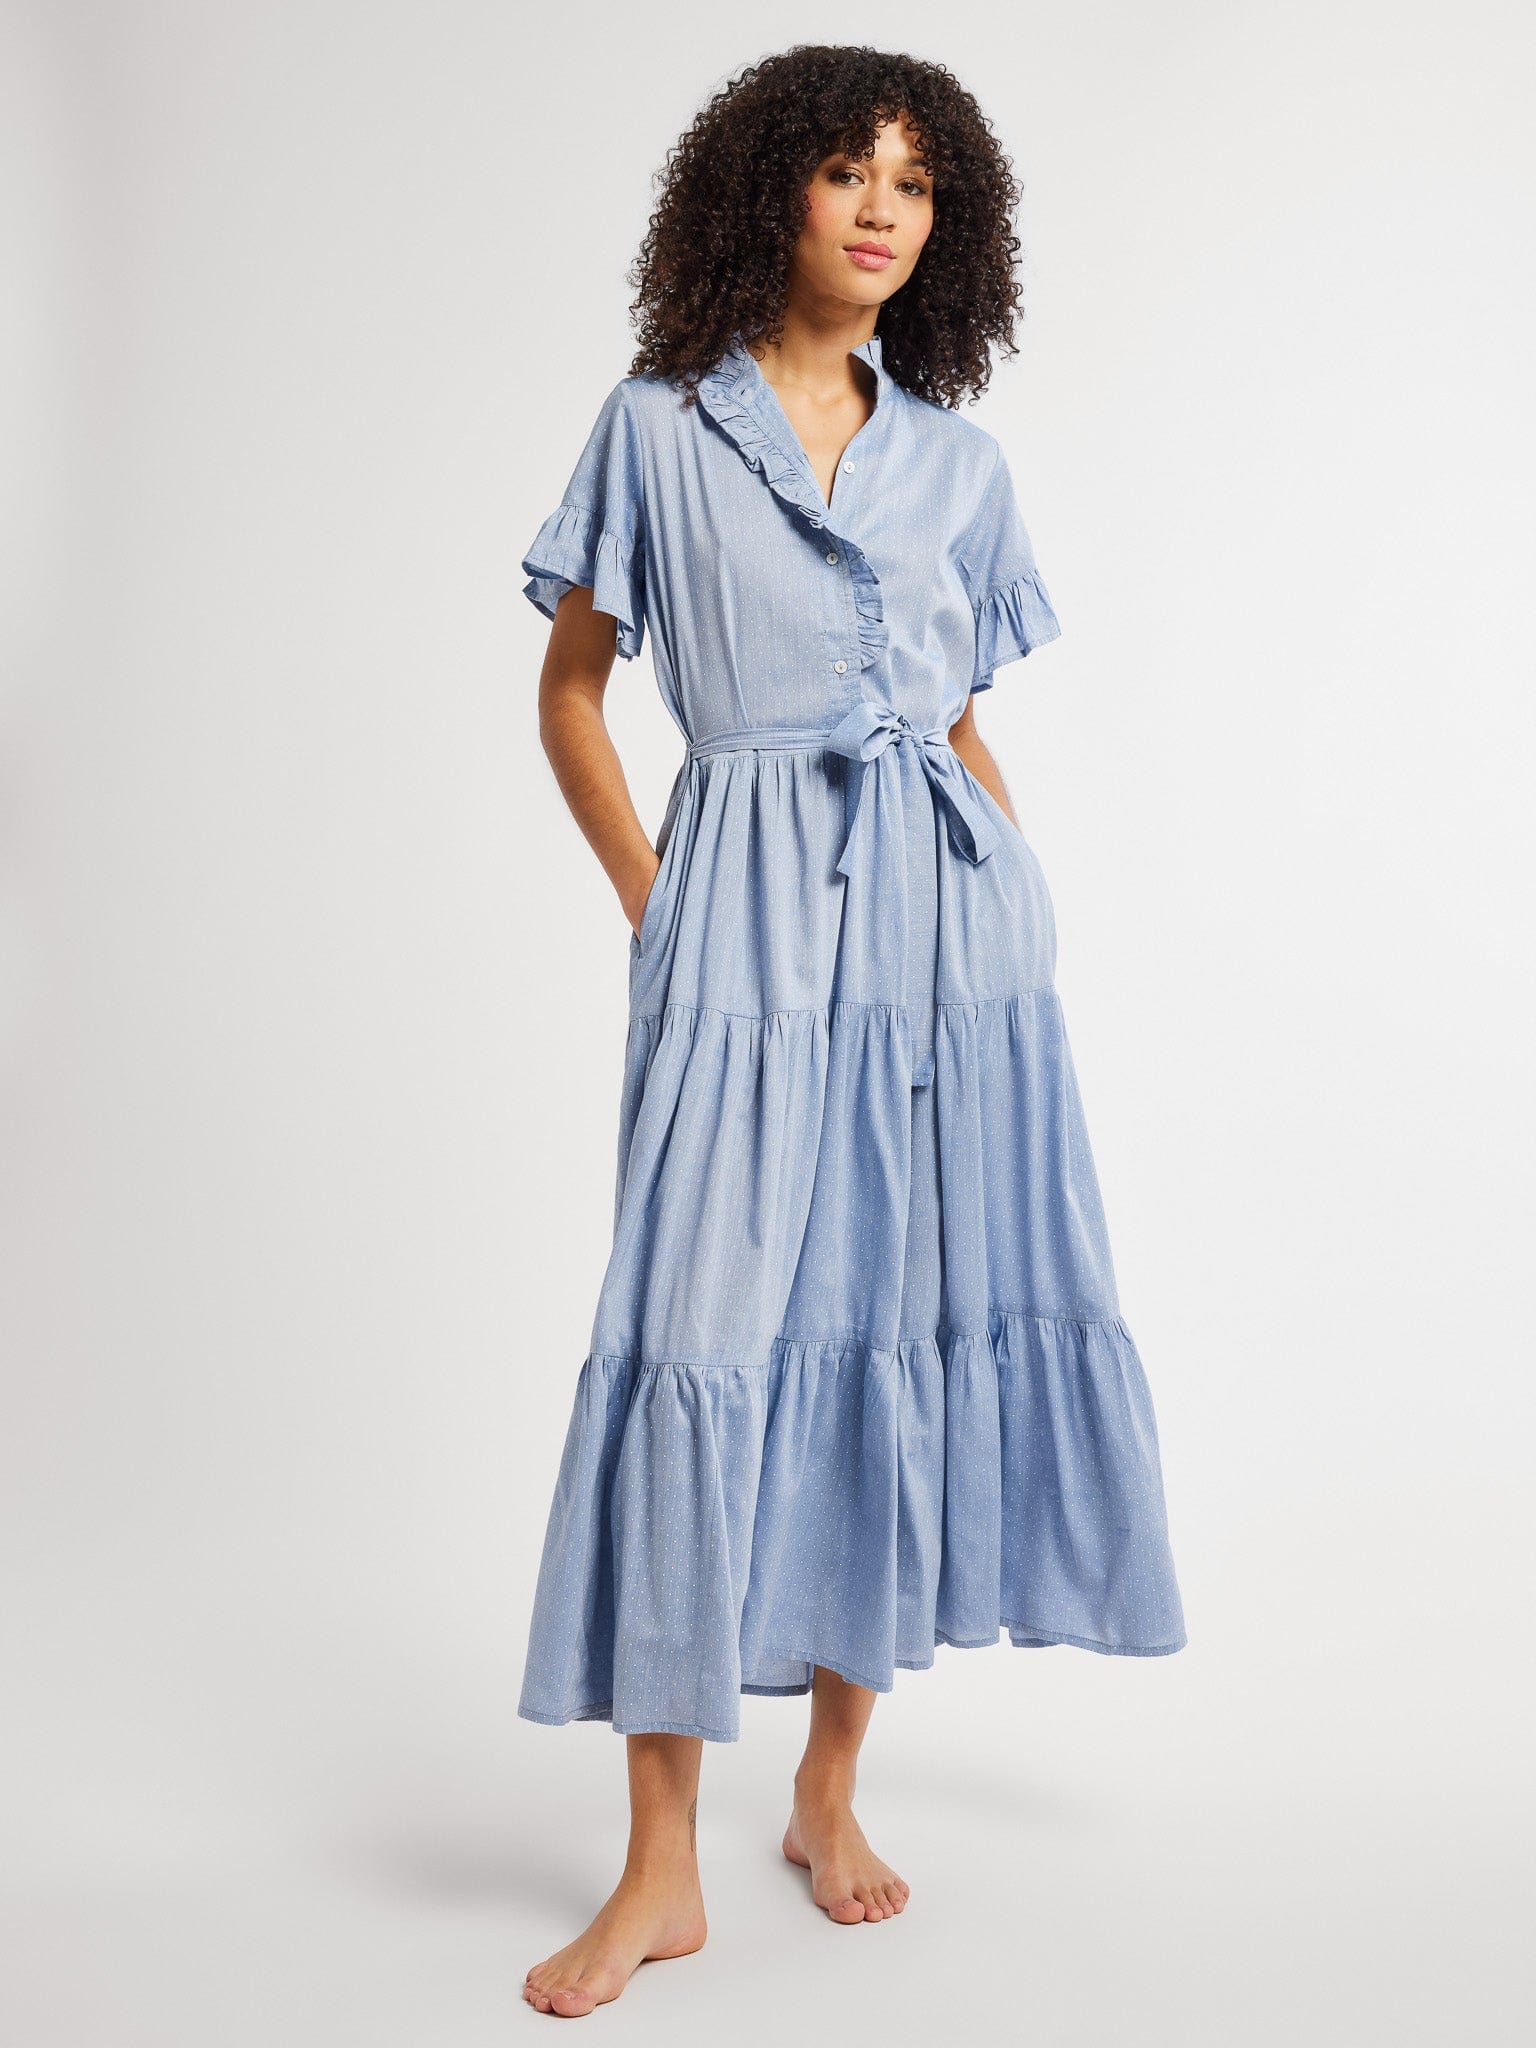 MILLE Clothing Victoria Dress in Chambray Polka Dot